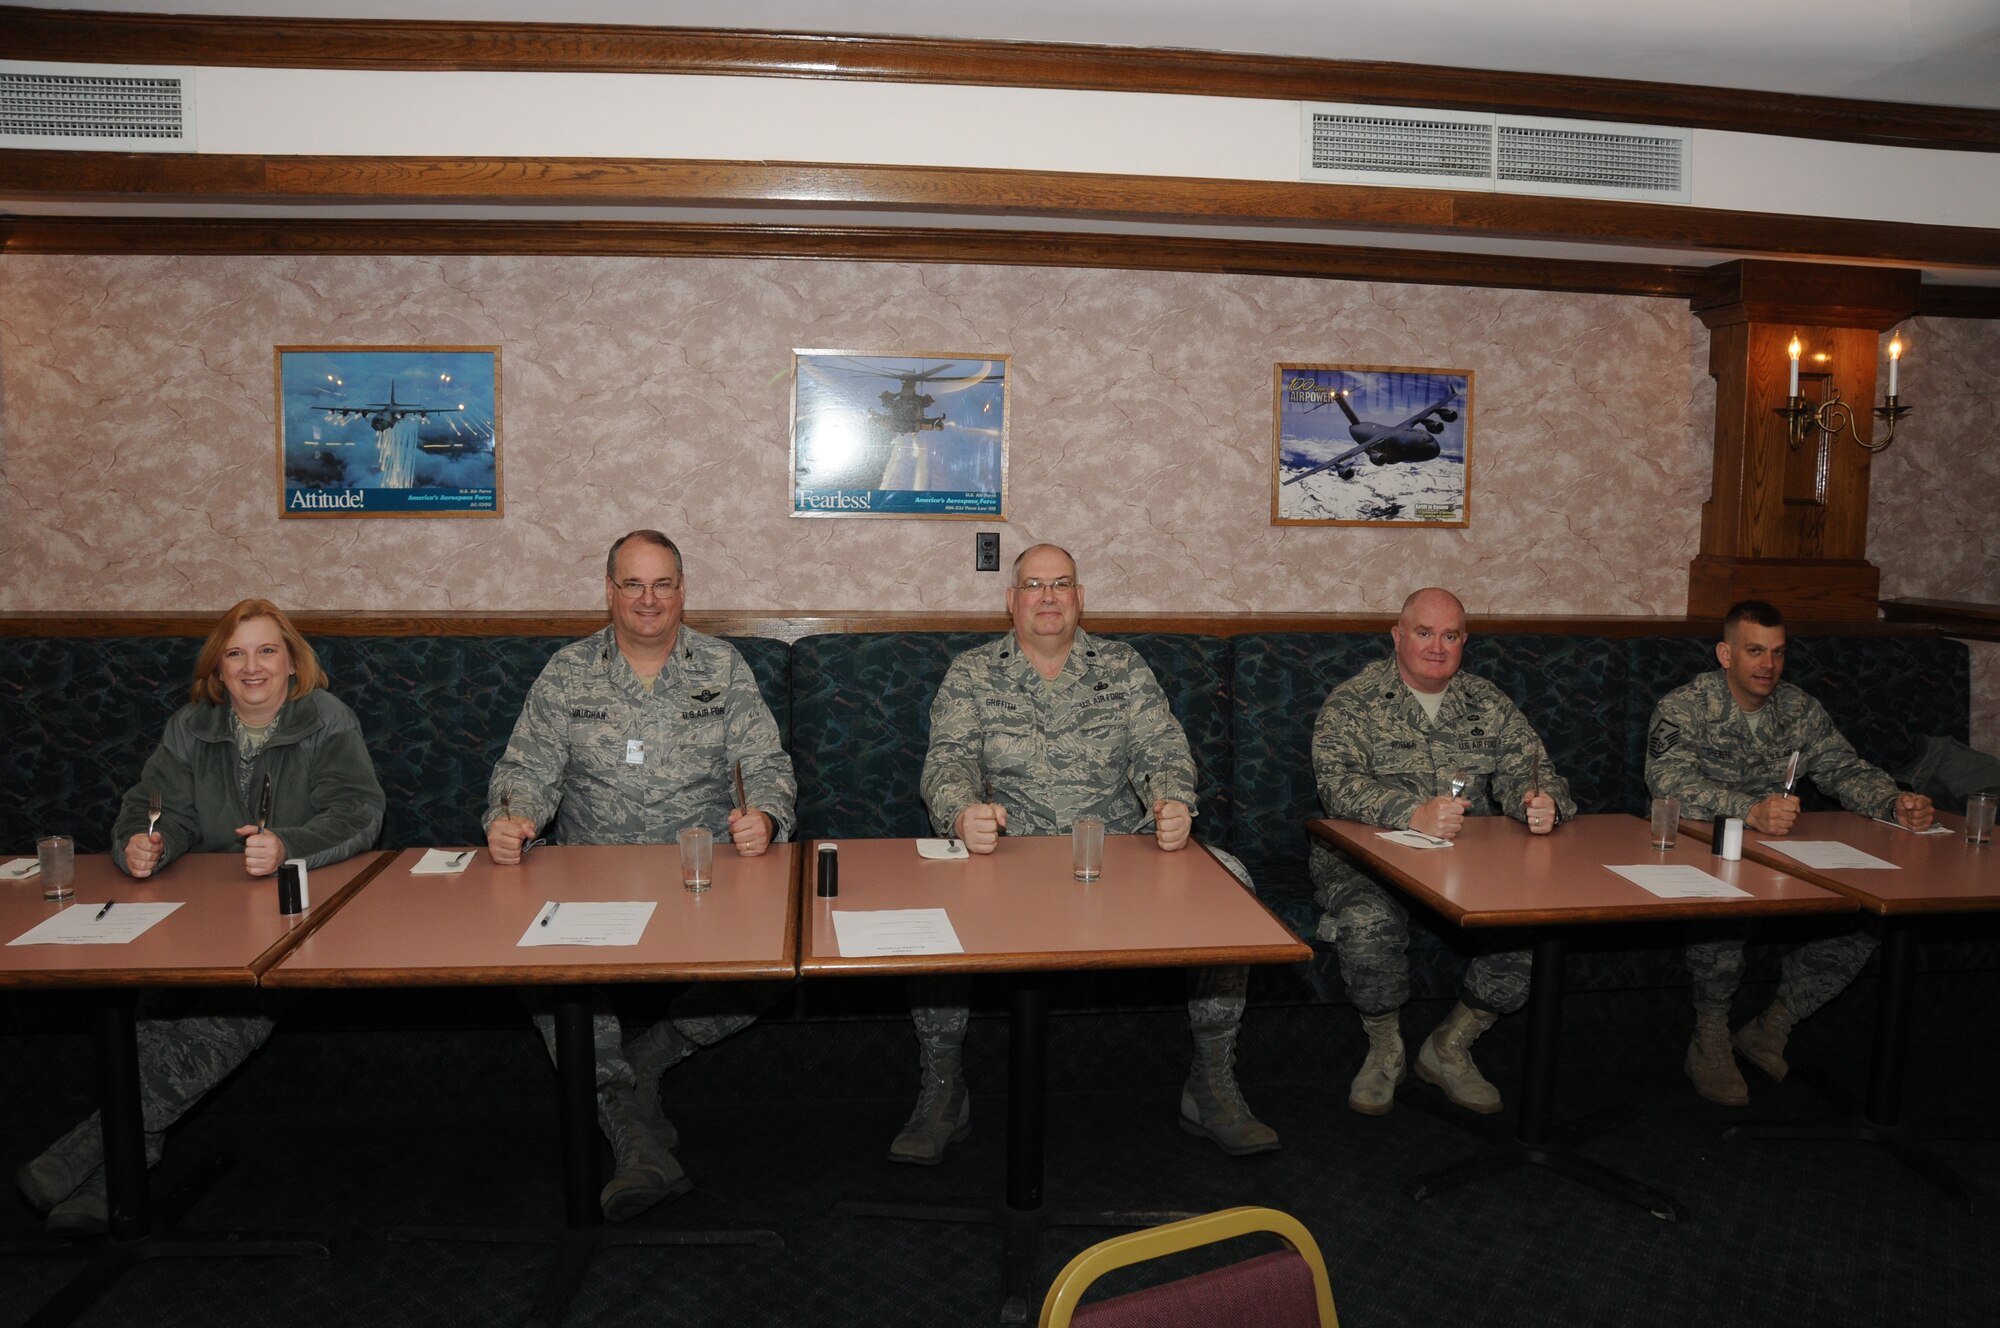 The esteemed panel of judges from (left to right)  Lt. Col. Linda Blaszak, Col. Timothy Vaughan, Lt. Colonels Barry Griffith, and Patrick Roemer, and Master Sgt. Randall Shenefiel eagerly await their meal. (U.S. Air Force photo/Staff Sgt. Peter Dean)

